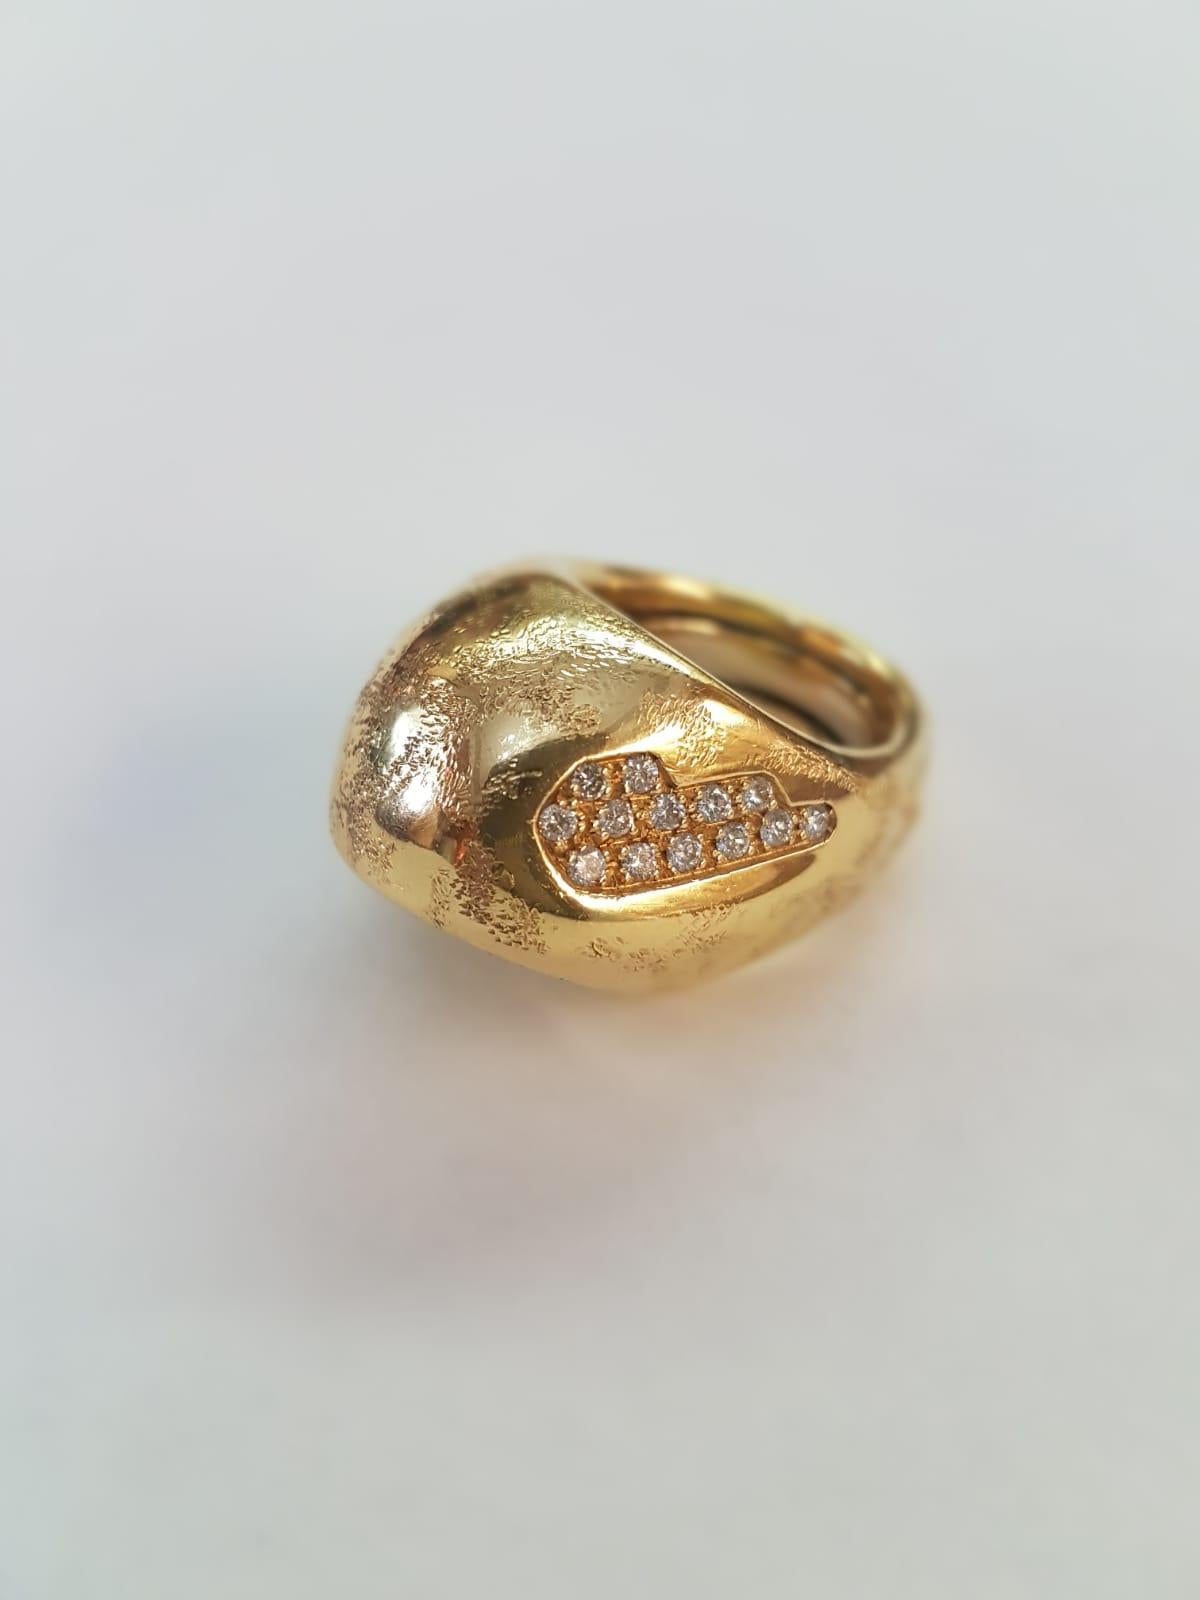 This one of a kind 18 Karat Yellow Gold (satin-finishing) Misani ring with is the result of a complex artistic process, as per every creation from Misani. His ability to enhance the peculiarities of each material and bringing out its natural essence